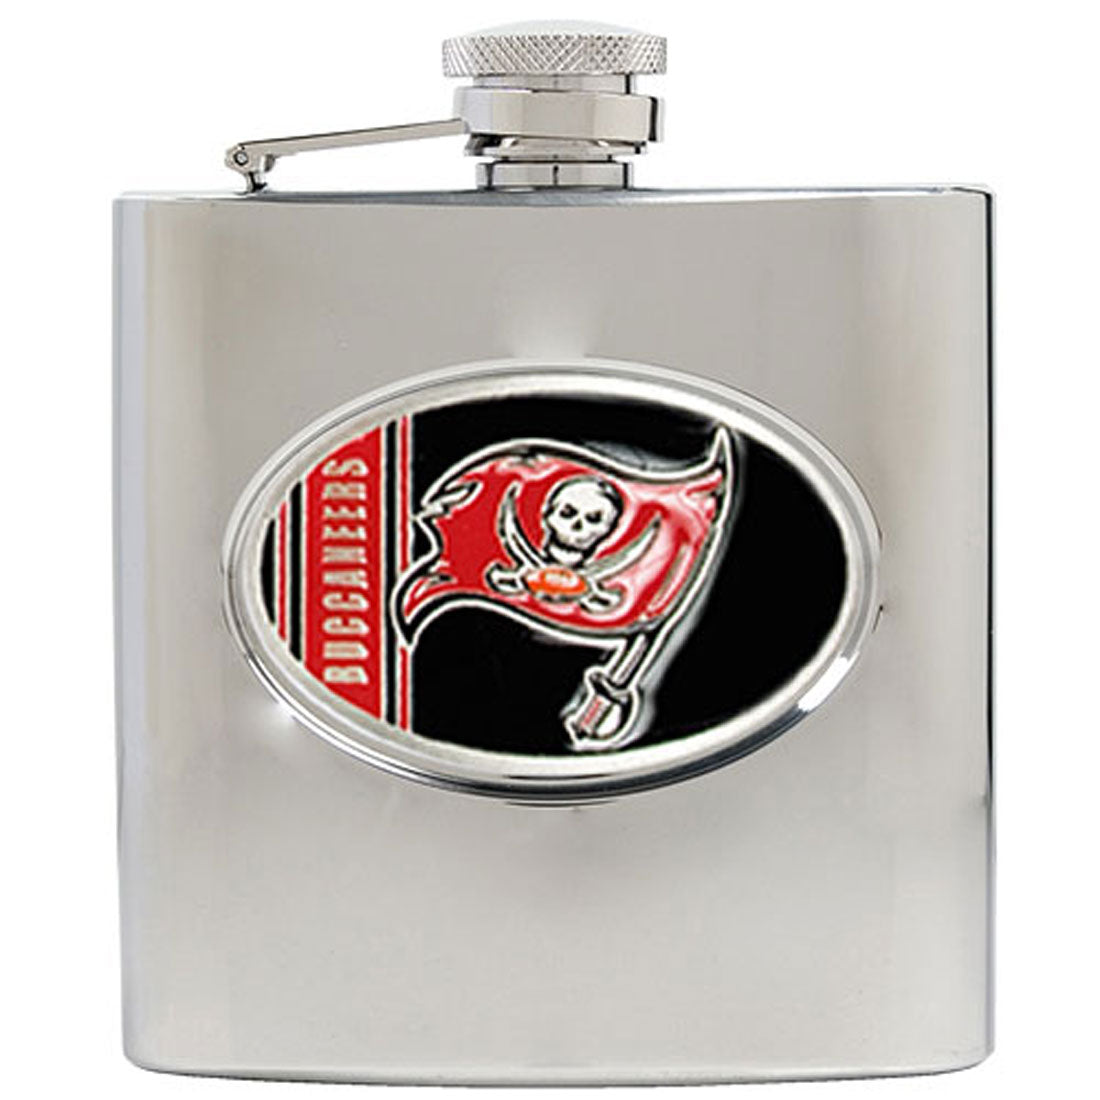 NFL 6-Ounce Matte Finished Stainless Steel Hip Flask with Oval Tampa Bay Buccaneers Team Emblem and Funnel